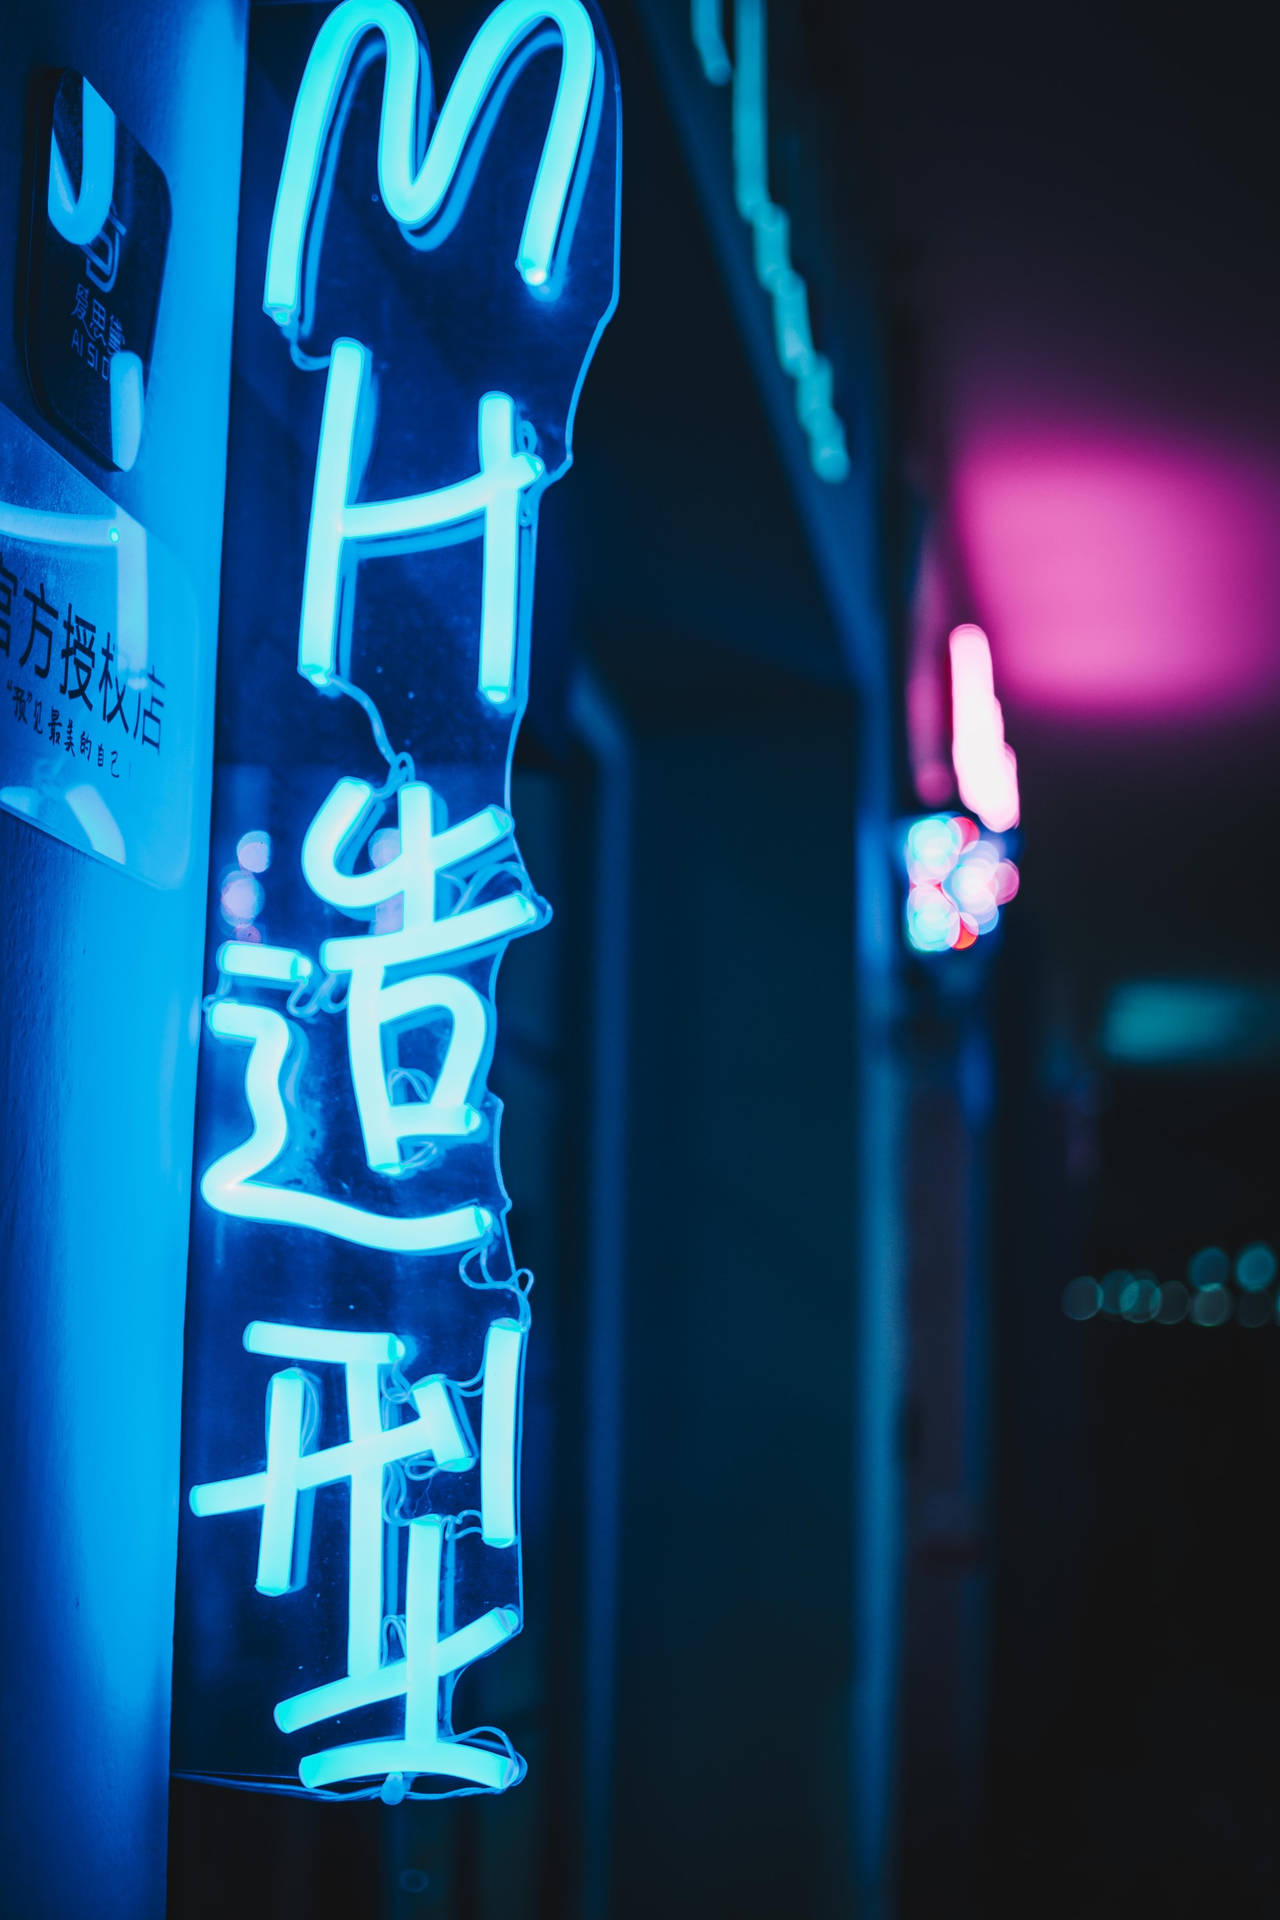 Store Signage In Neon Blue iPhone Wallpaper